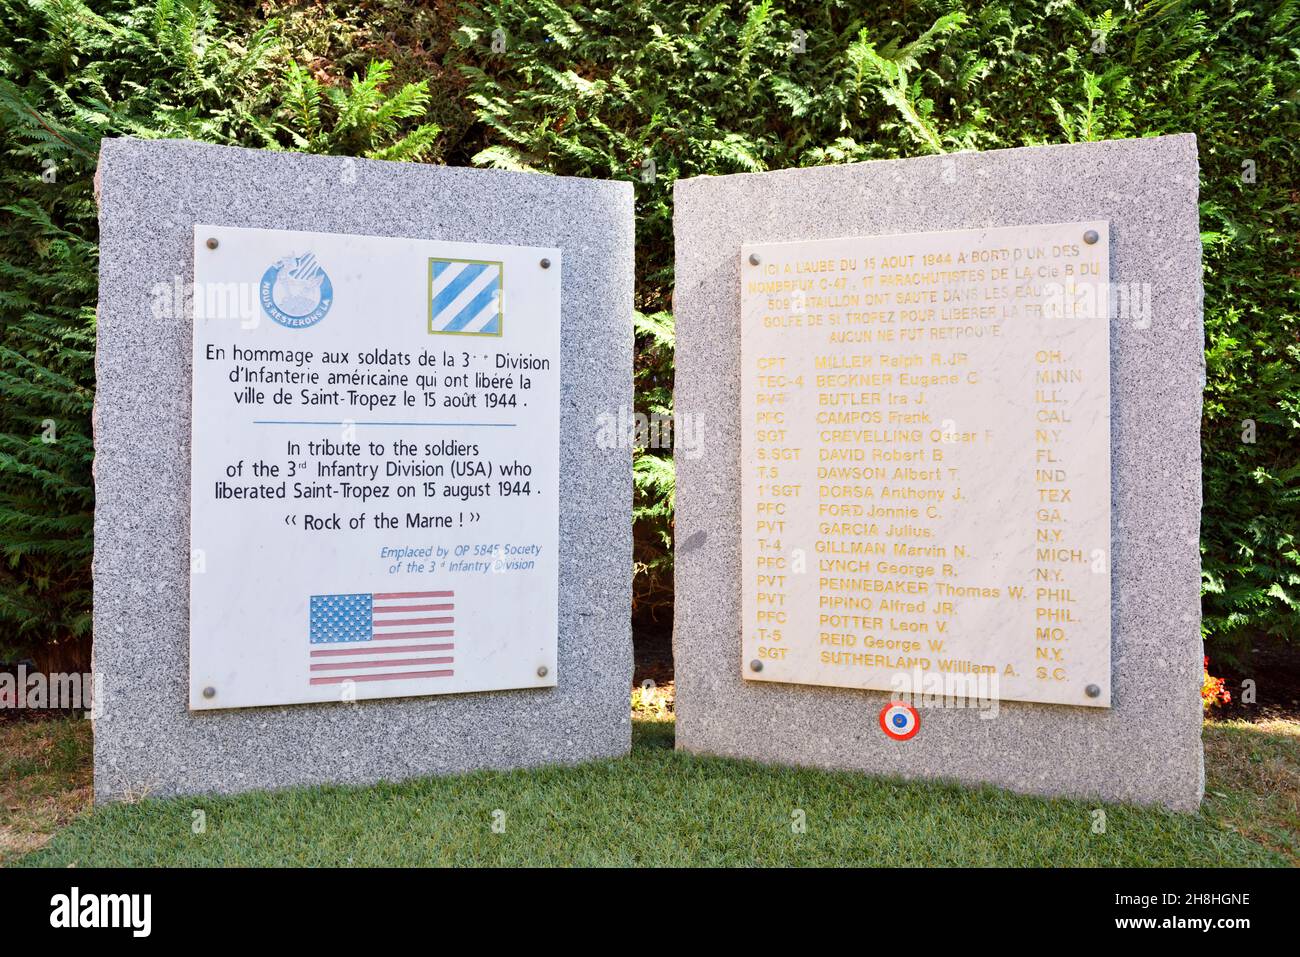 France, Var, Saint-Tropez, plaque in memory of the American soldiers who died during the liberation of Saint-Tropez on 15 August 1944 during the Second World War Stock Photo